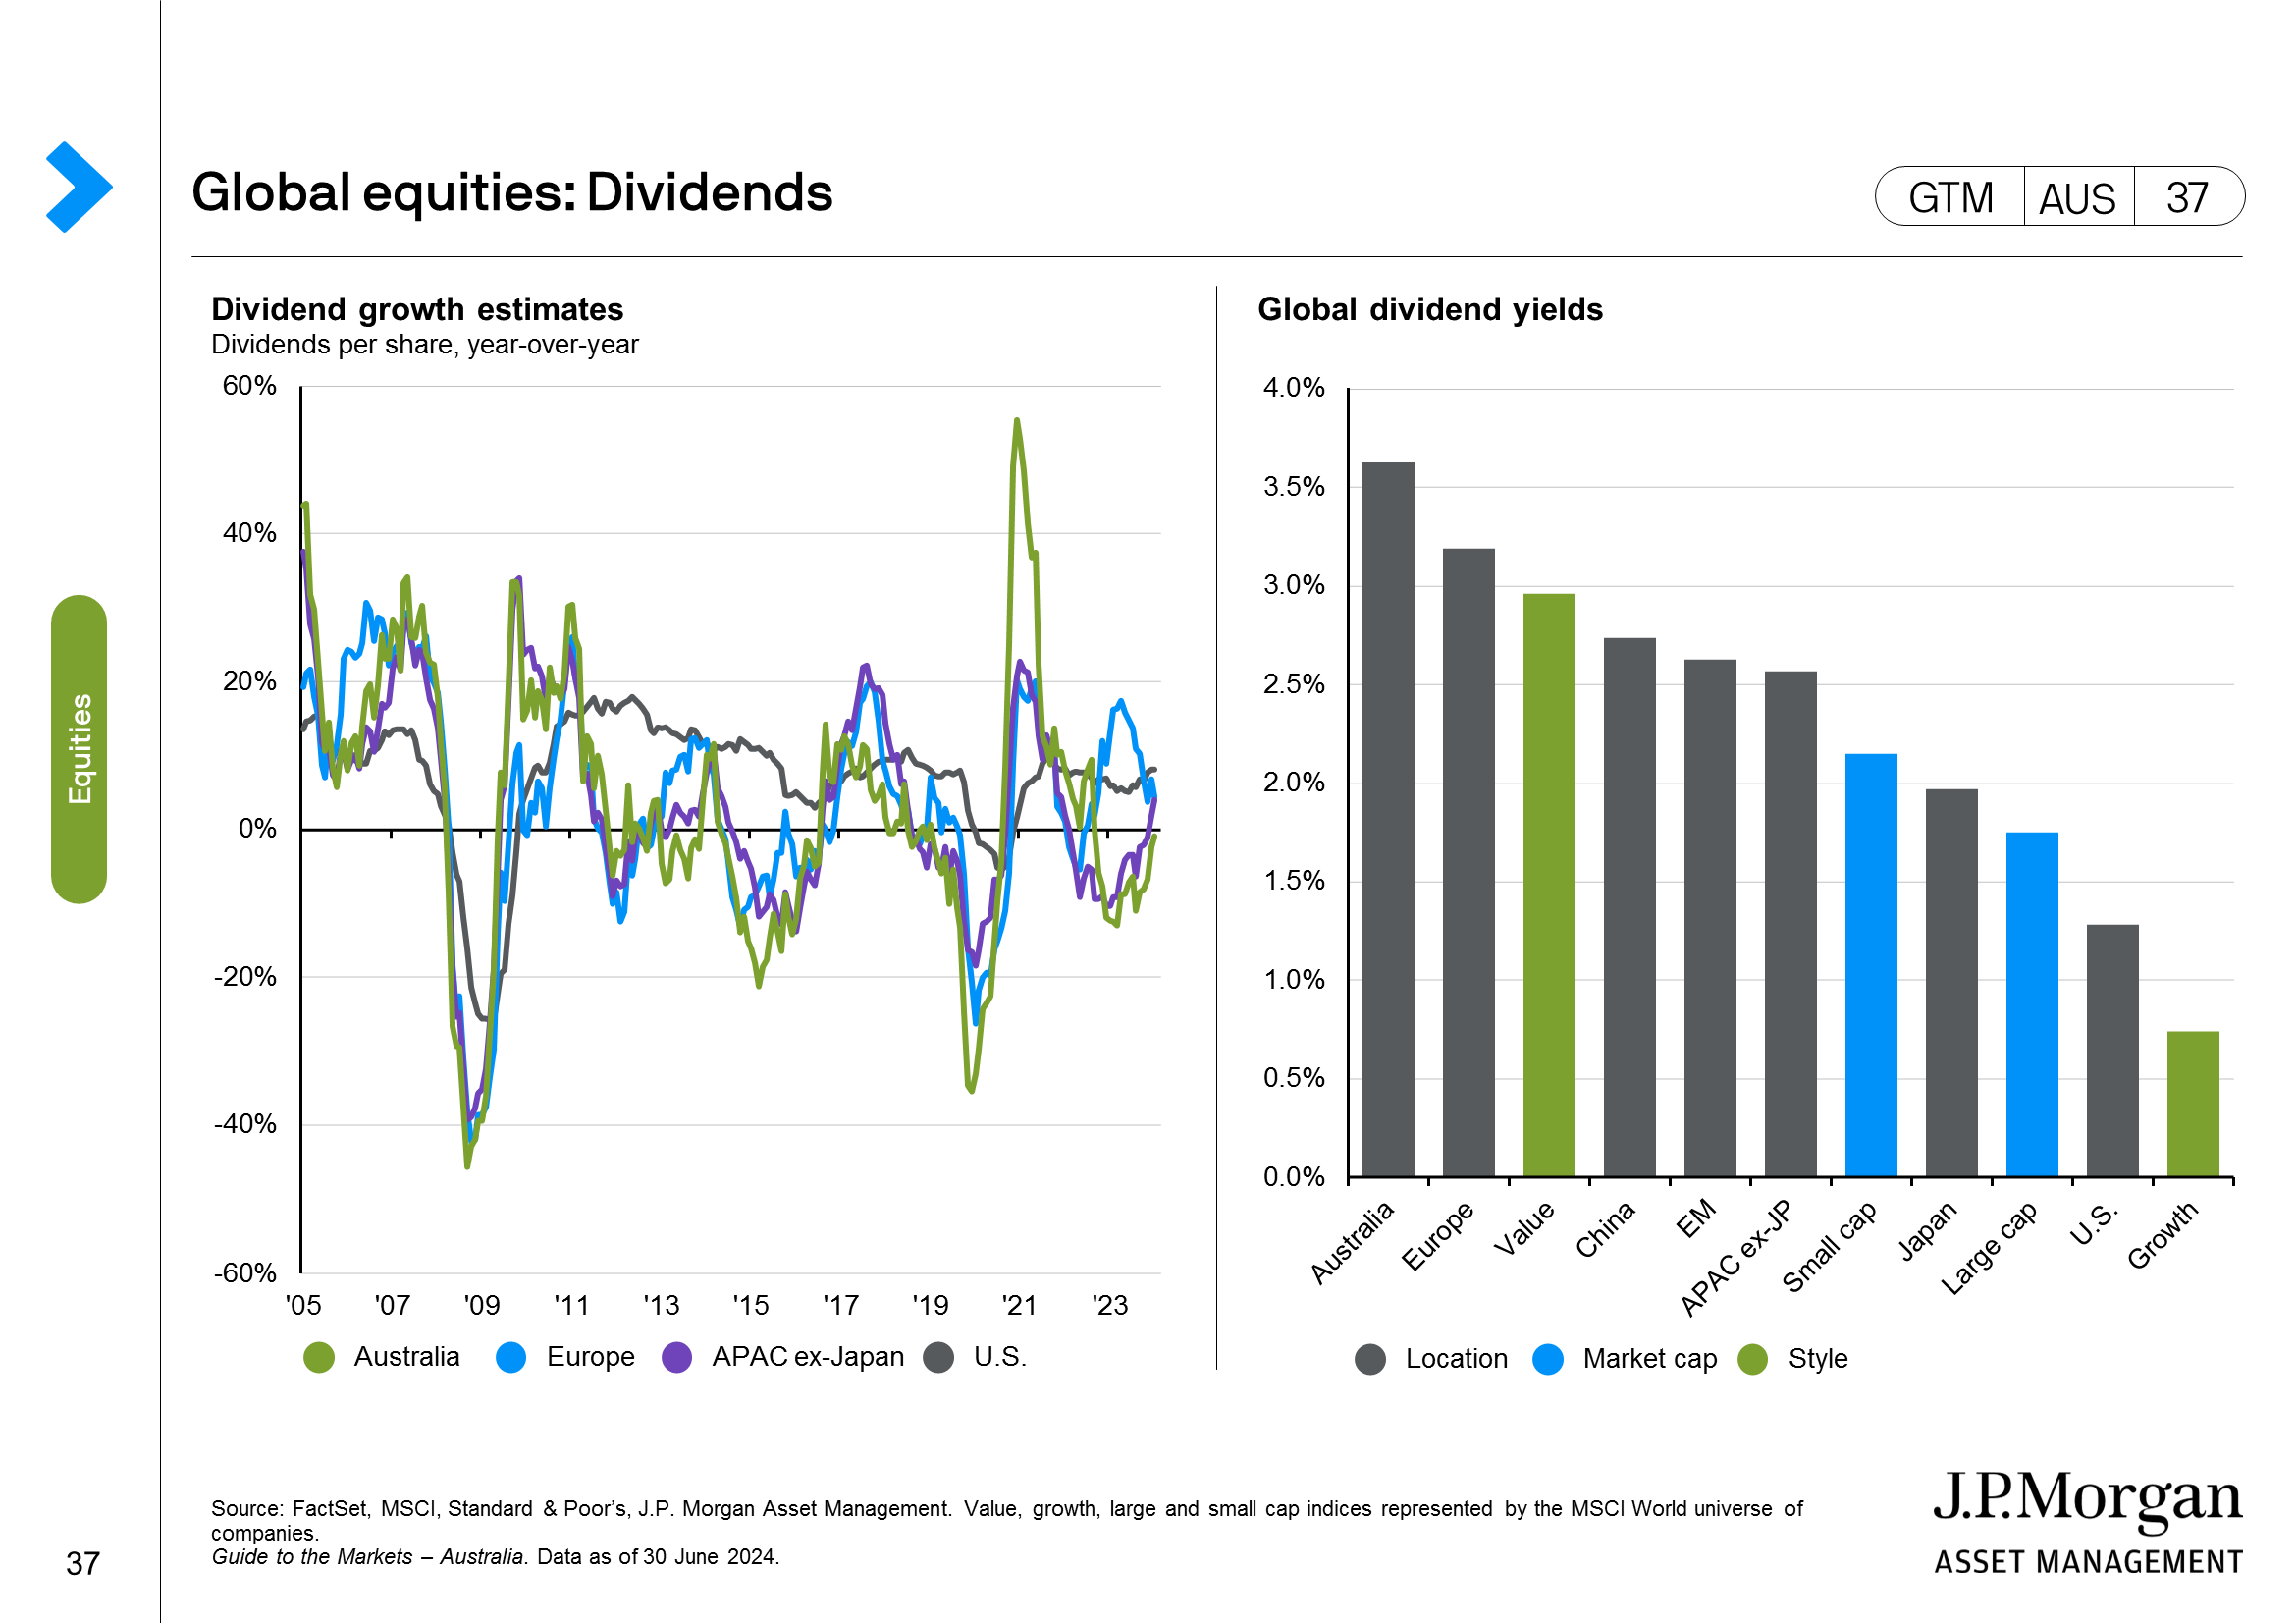 Global equities: Earnings and revisions